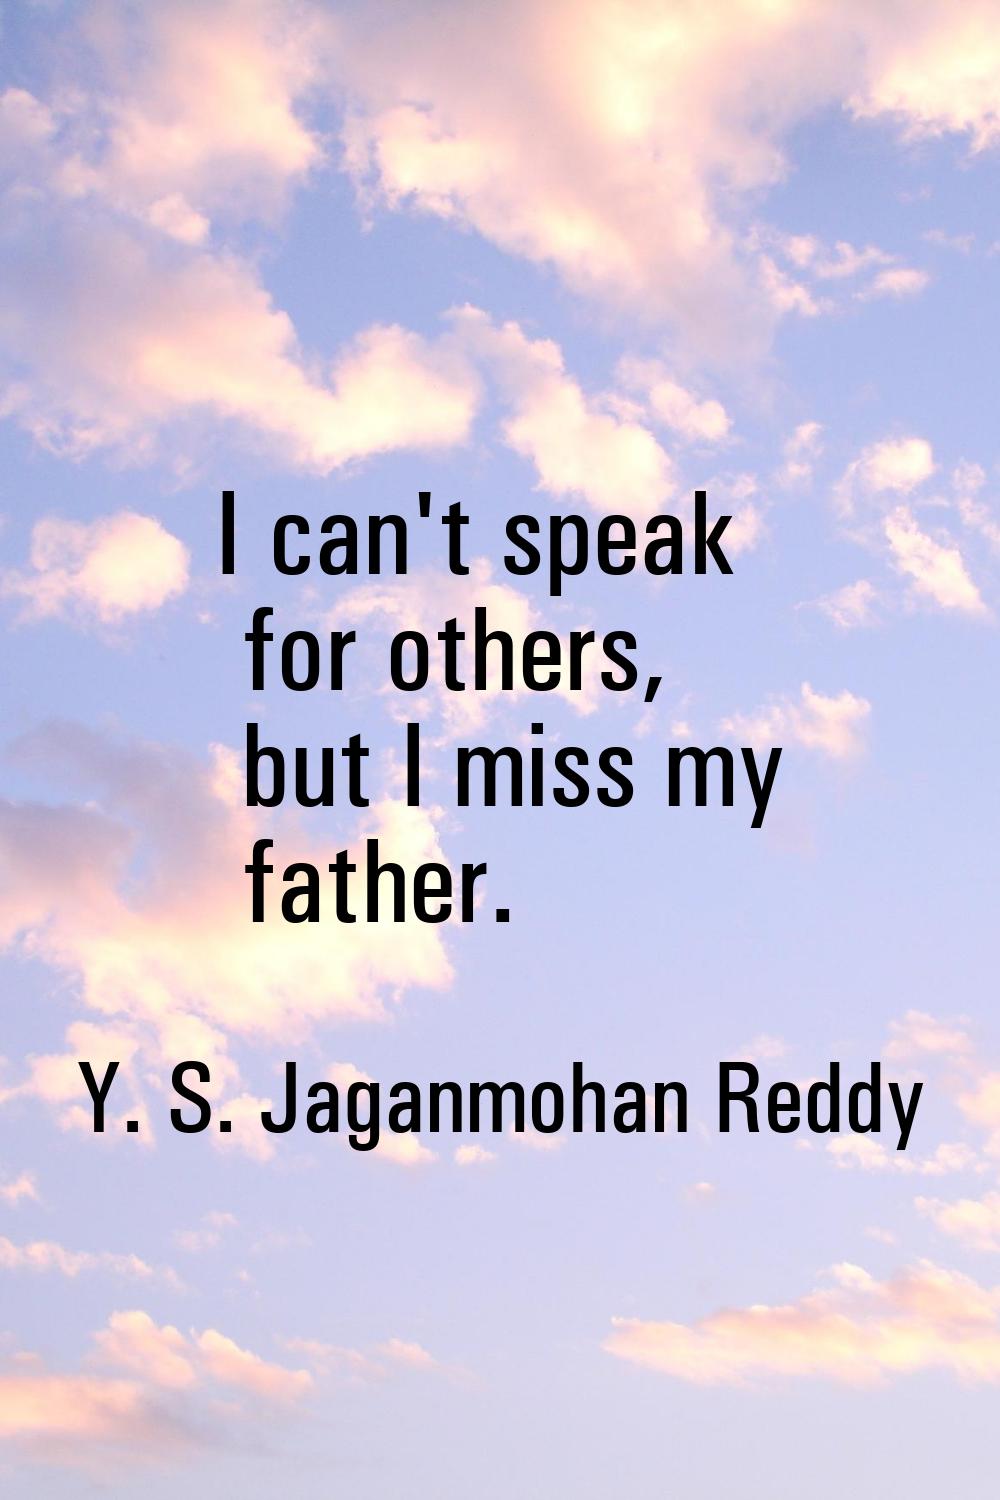 I can't speak for others, but I miss my father.